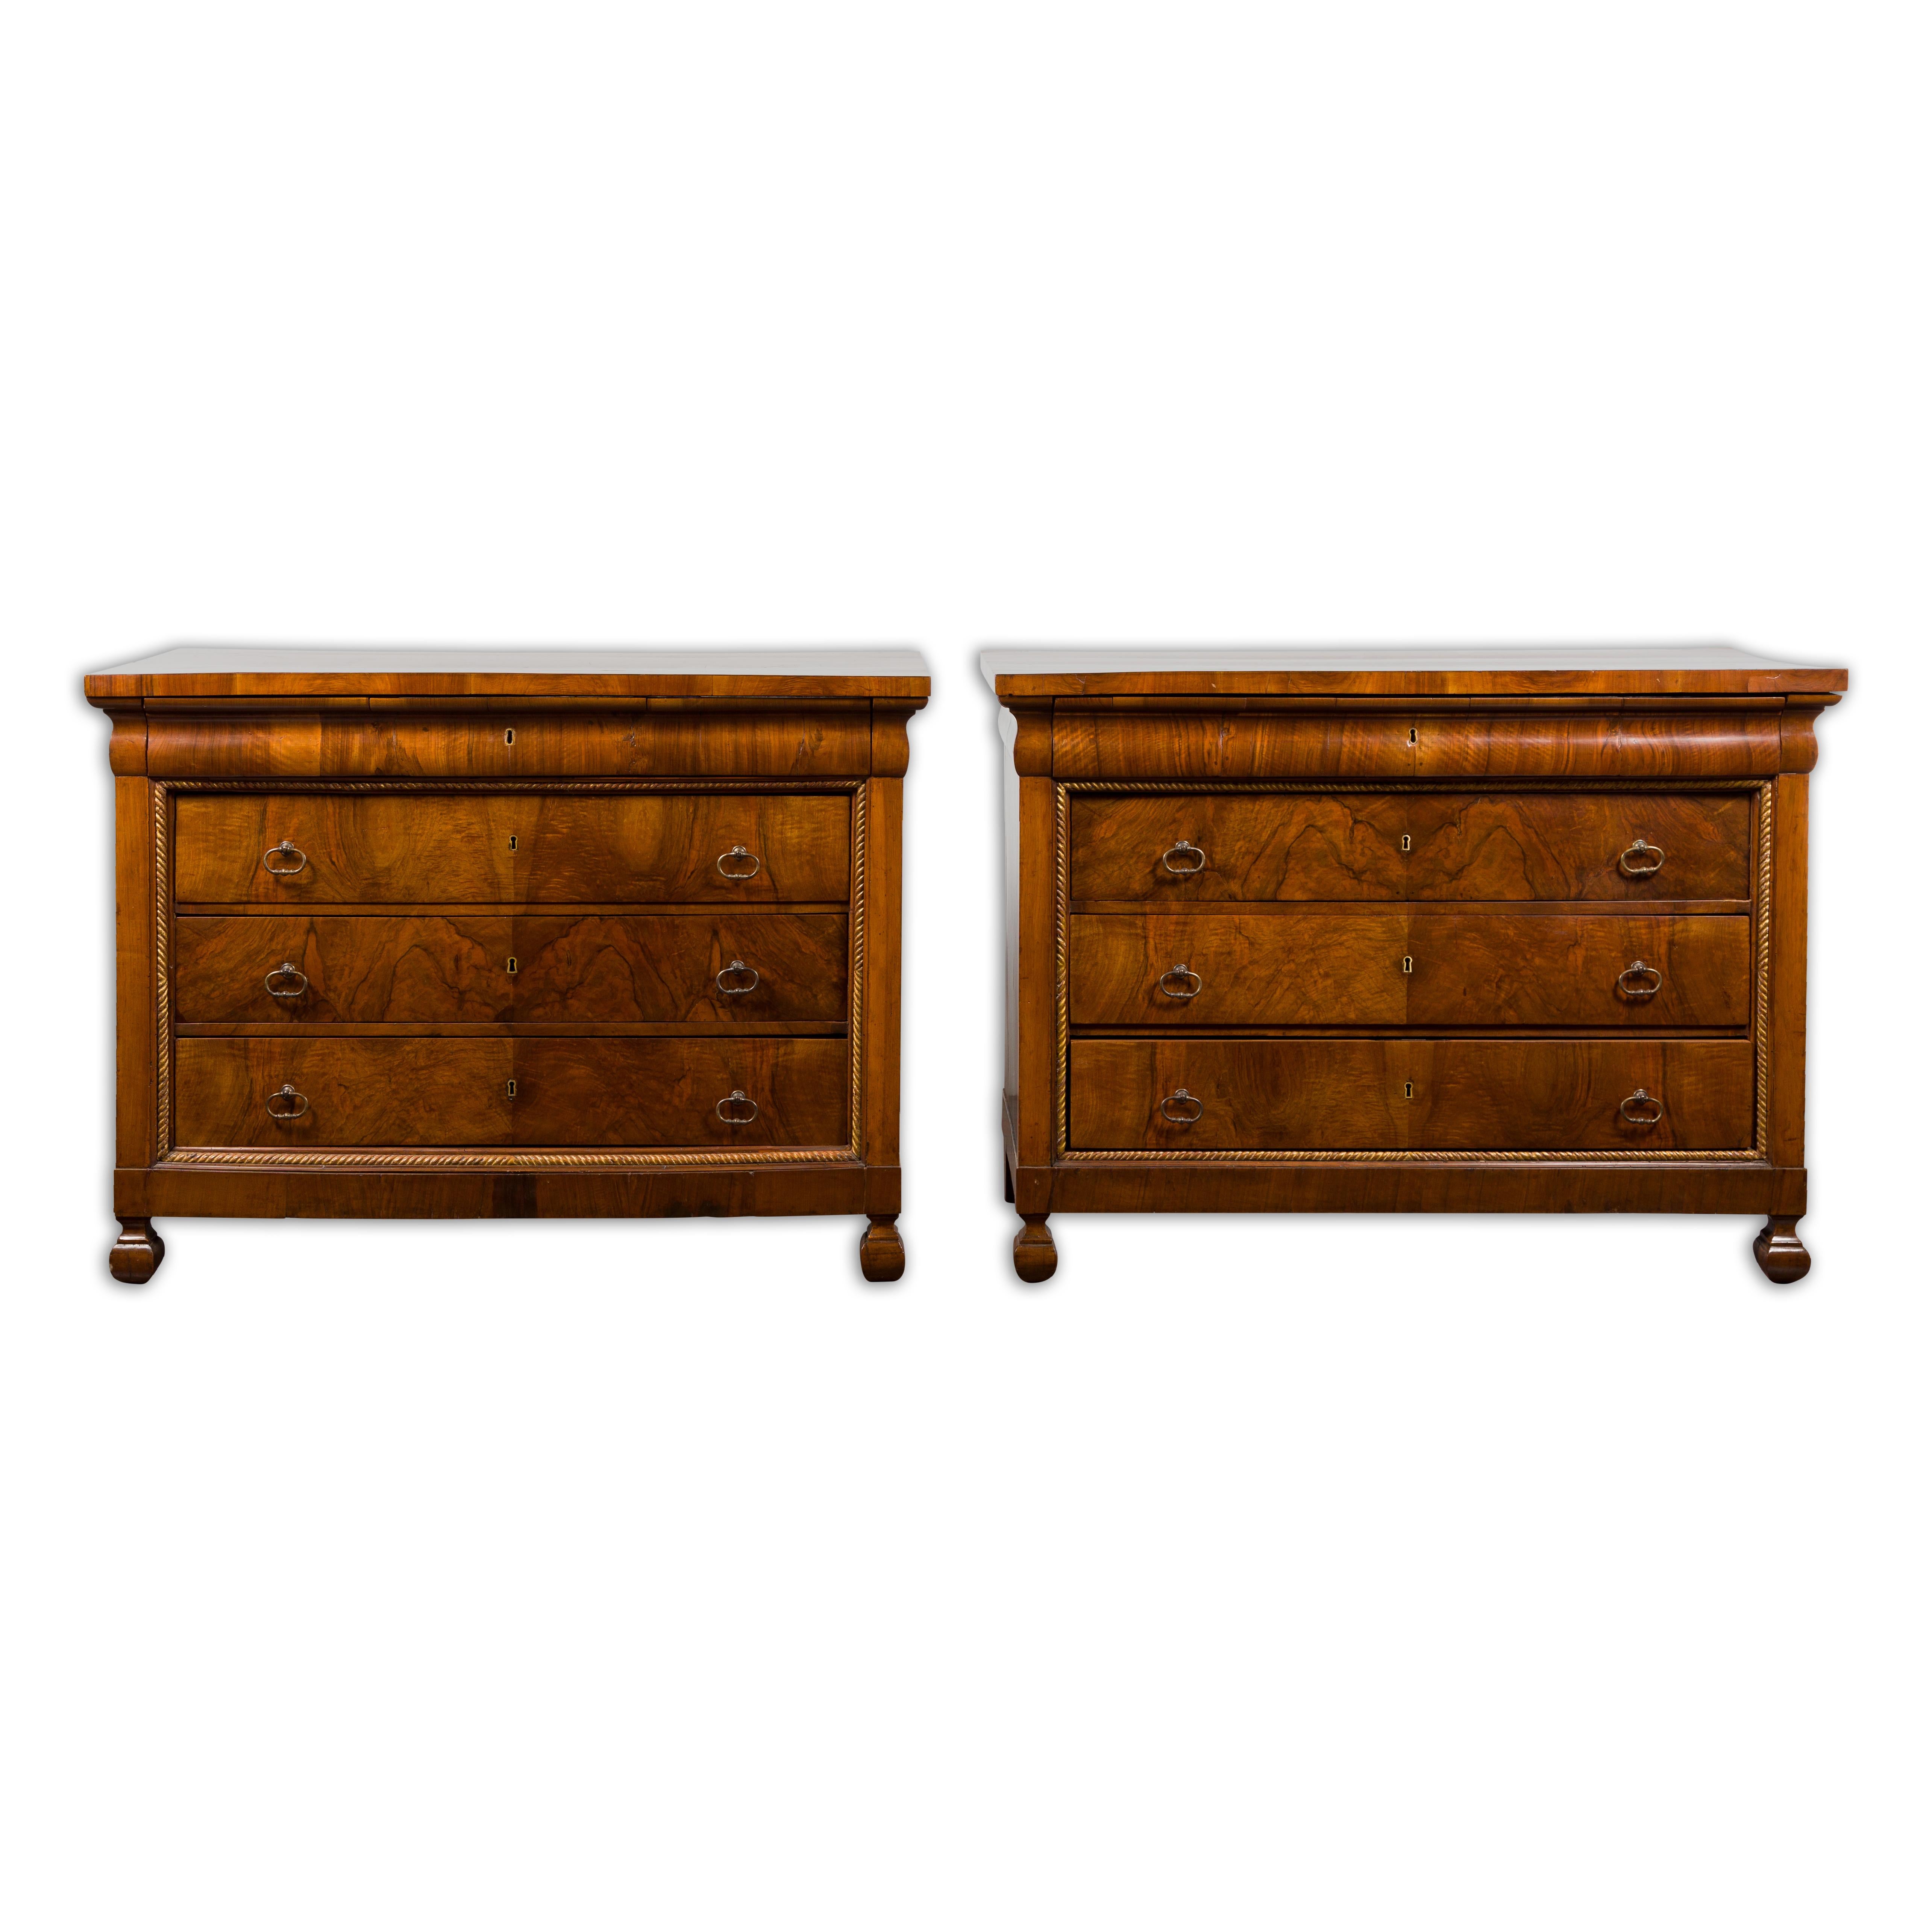 Pair of Italian 18th Century Walnut Four-Drawer Commodes with Bookmatched Veneer For Sale 14